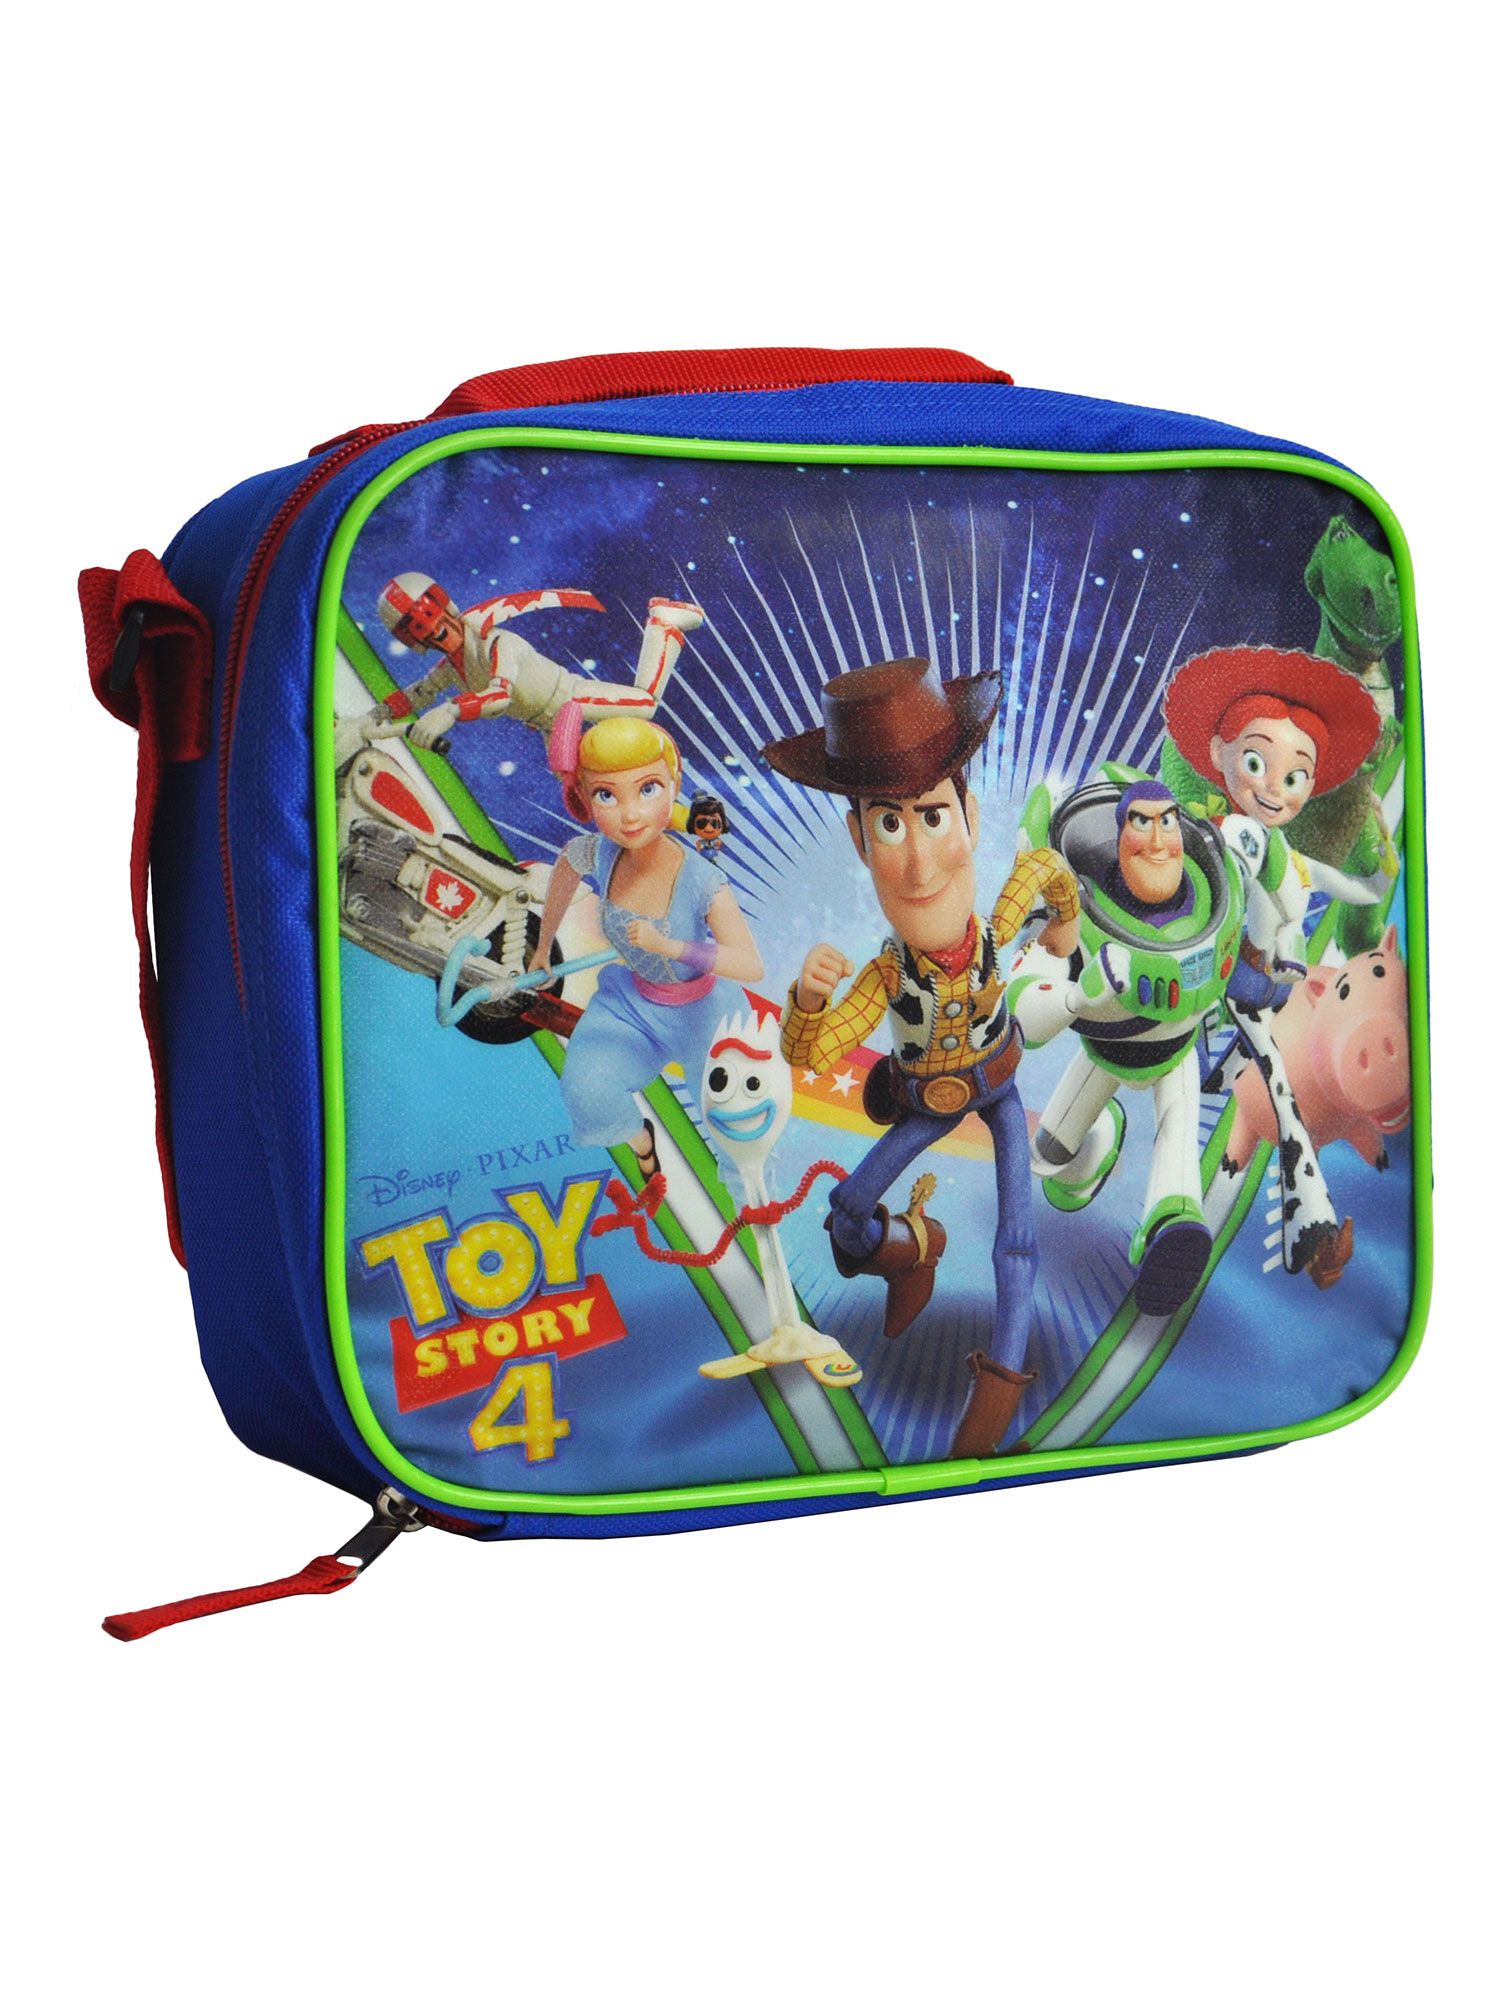 Toy Story 4 Insulated Lunch Bag Shoulder Strap Bo Peep Forky Woody - image 2 of 4